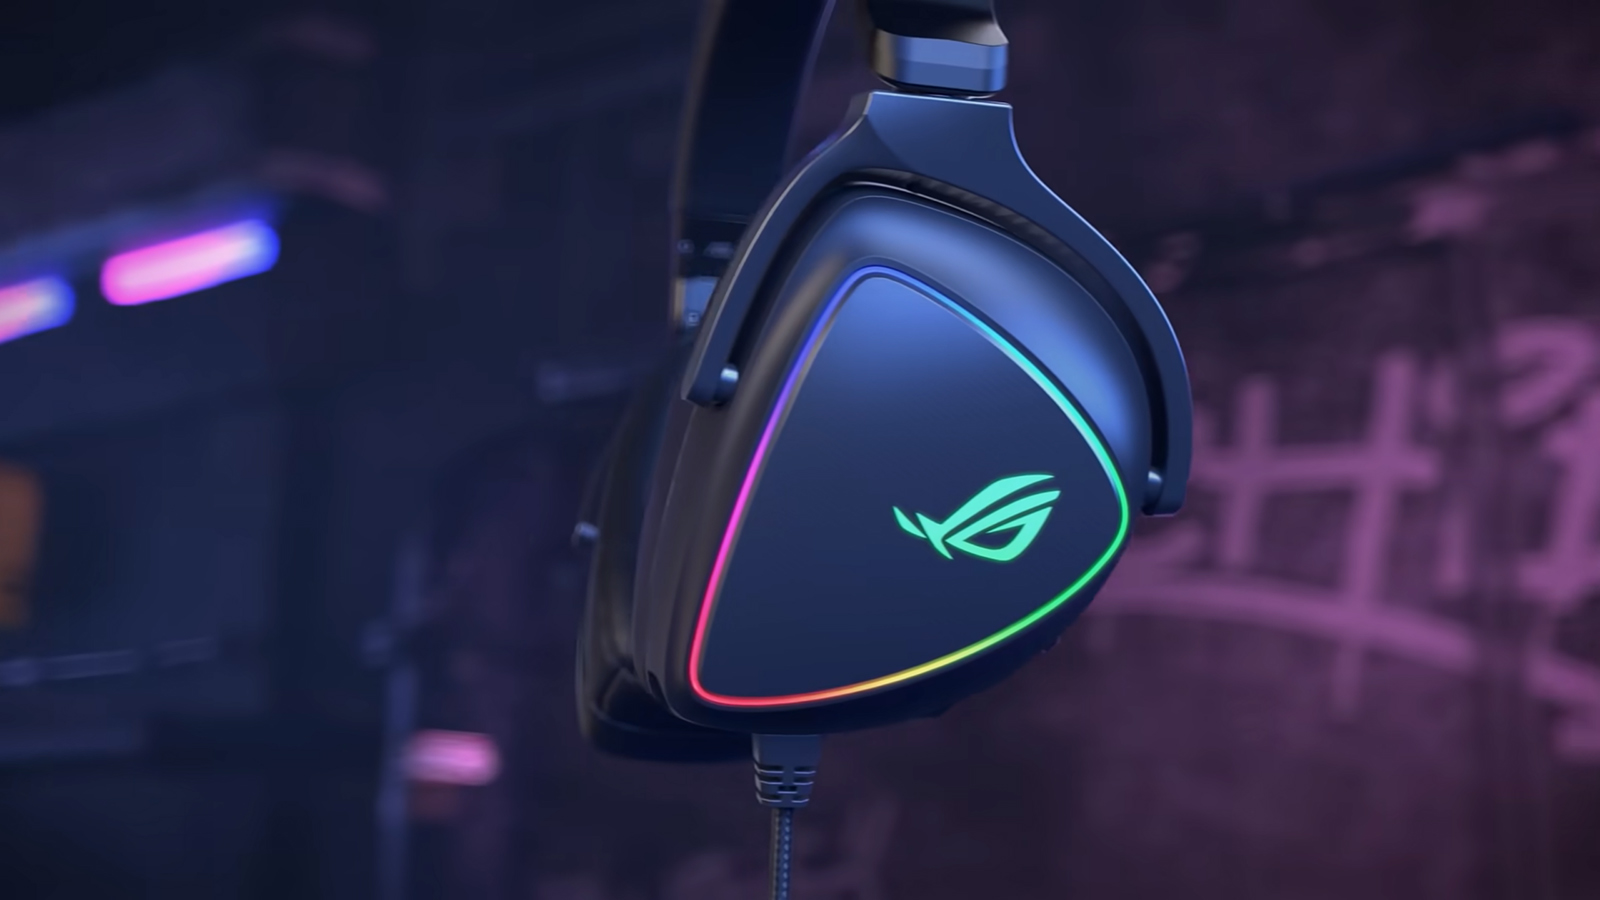 ASUS ROG Delta S Wireless Headphones Review – Geared For Gamers